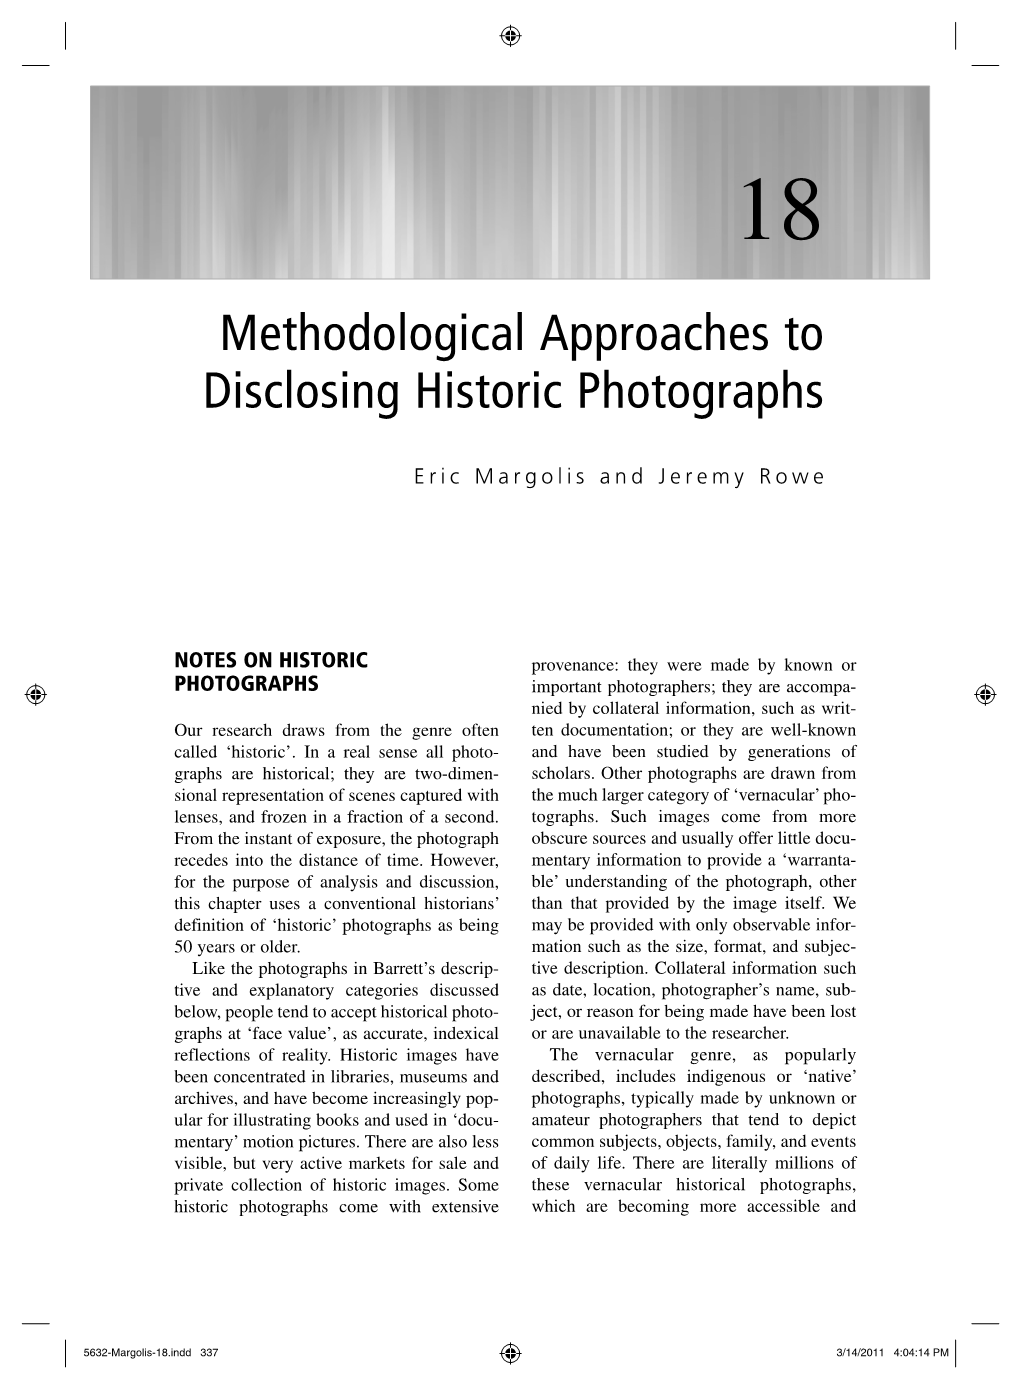 Methodological Approaches to Disclosing Historic Photographs